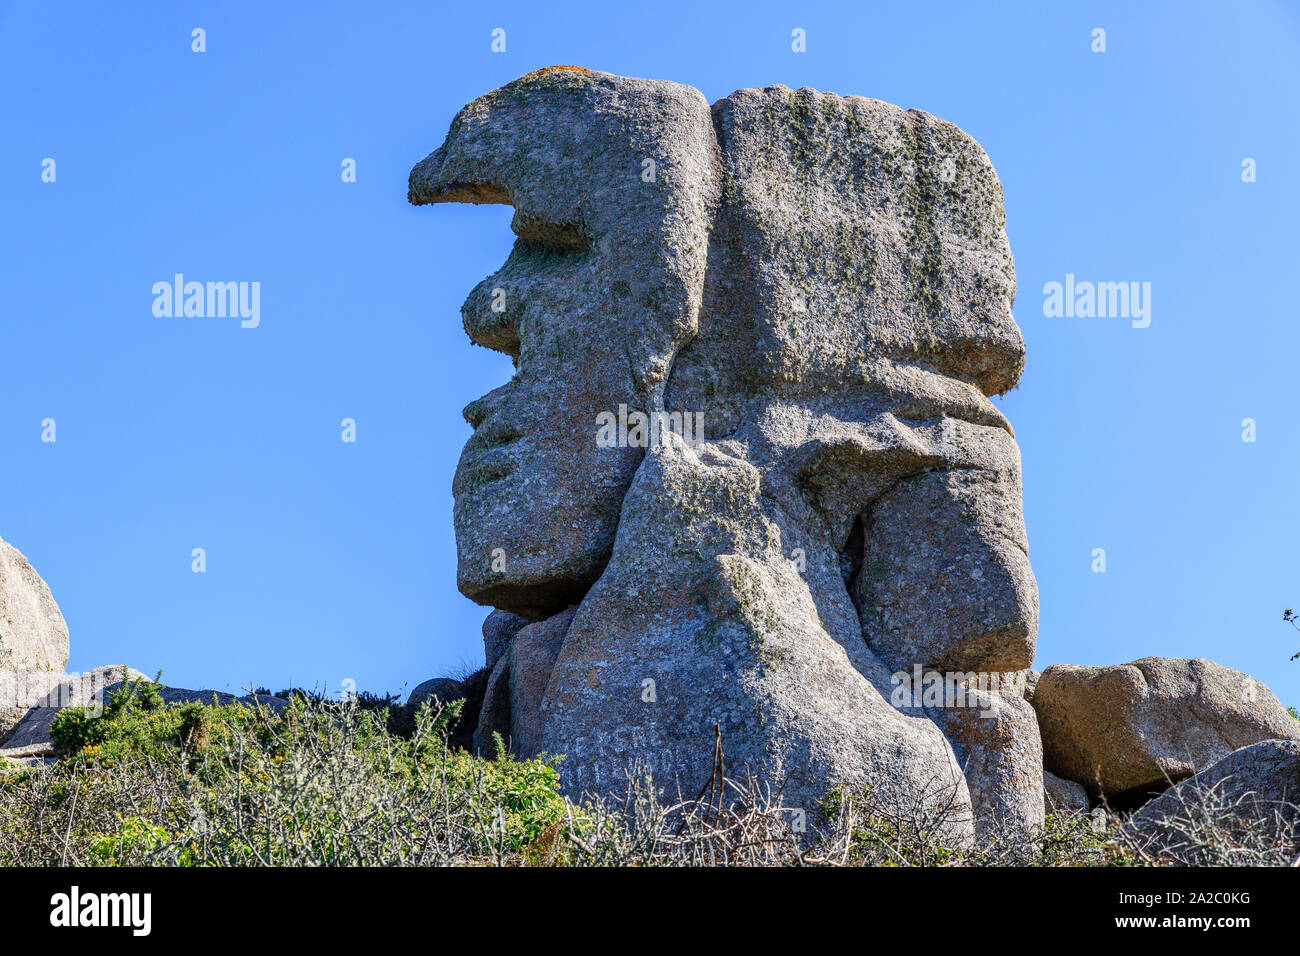 France, Cotes d'Armor, Cote de granit rose (Pink Granite Coast), Trebeurden, granitic rock of Pere Trebeurden located on the promontory of the Pointe Stock Photo